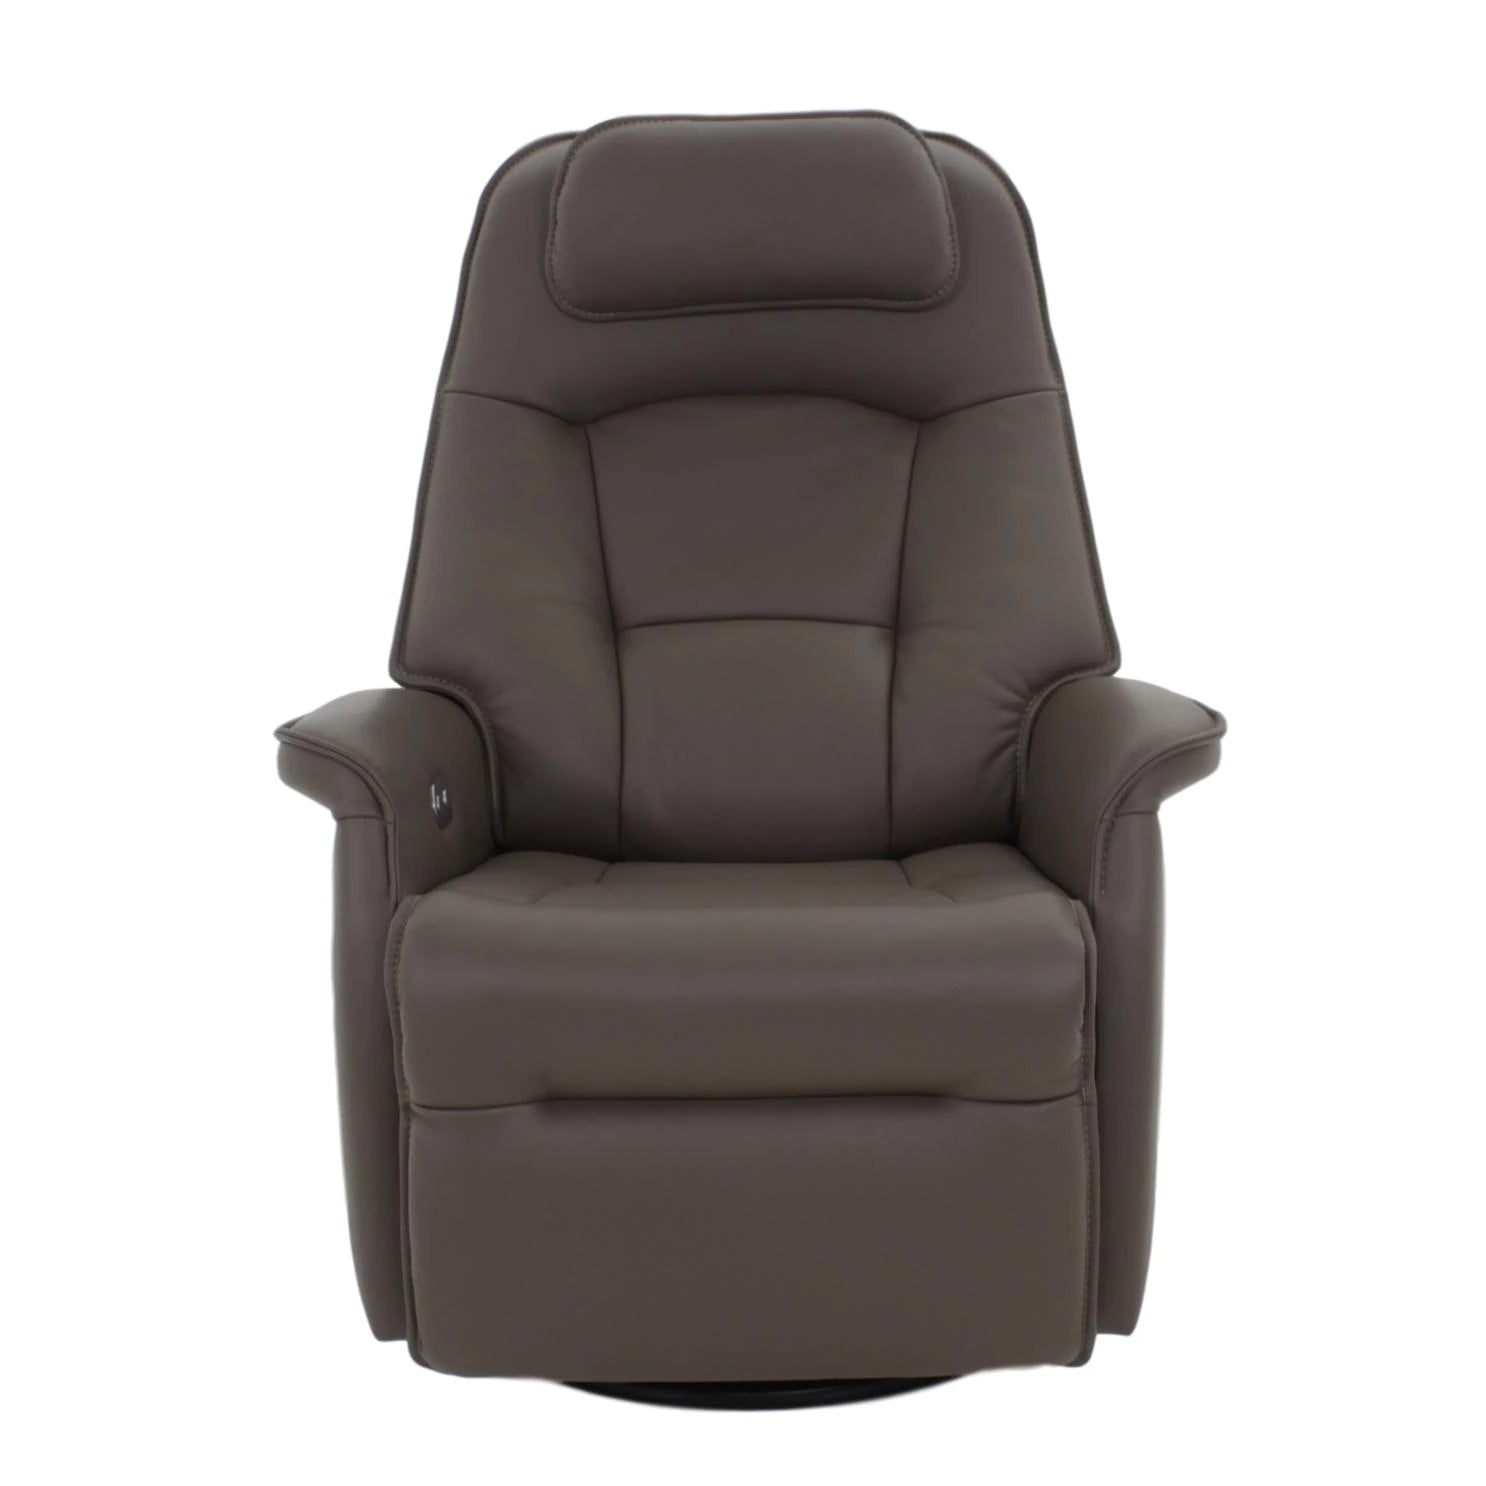 the Fjords  contemporary Stockholm Large living room reclining leather recliner is available in Edmonton at McElherans Furniture + Design